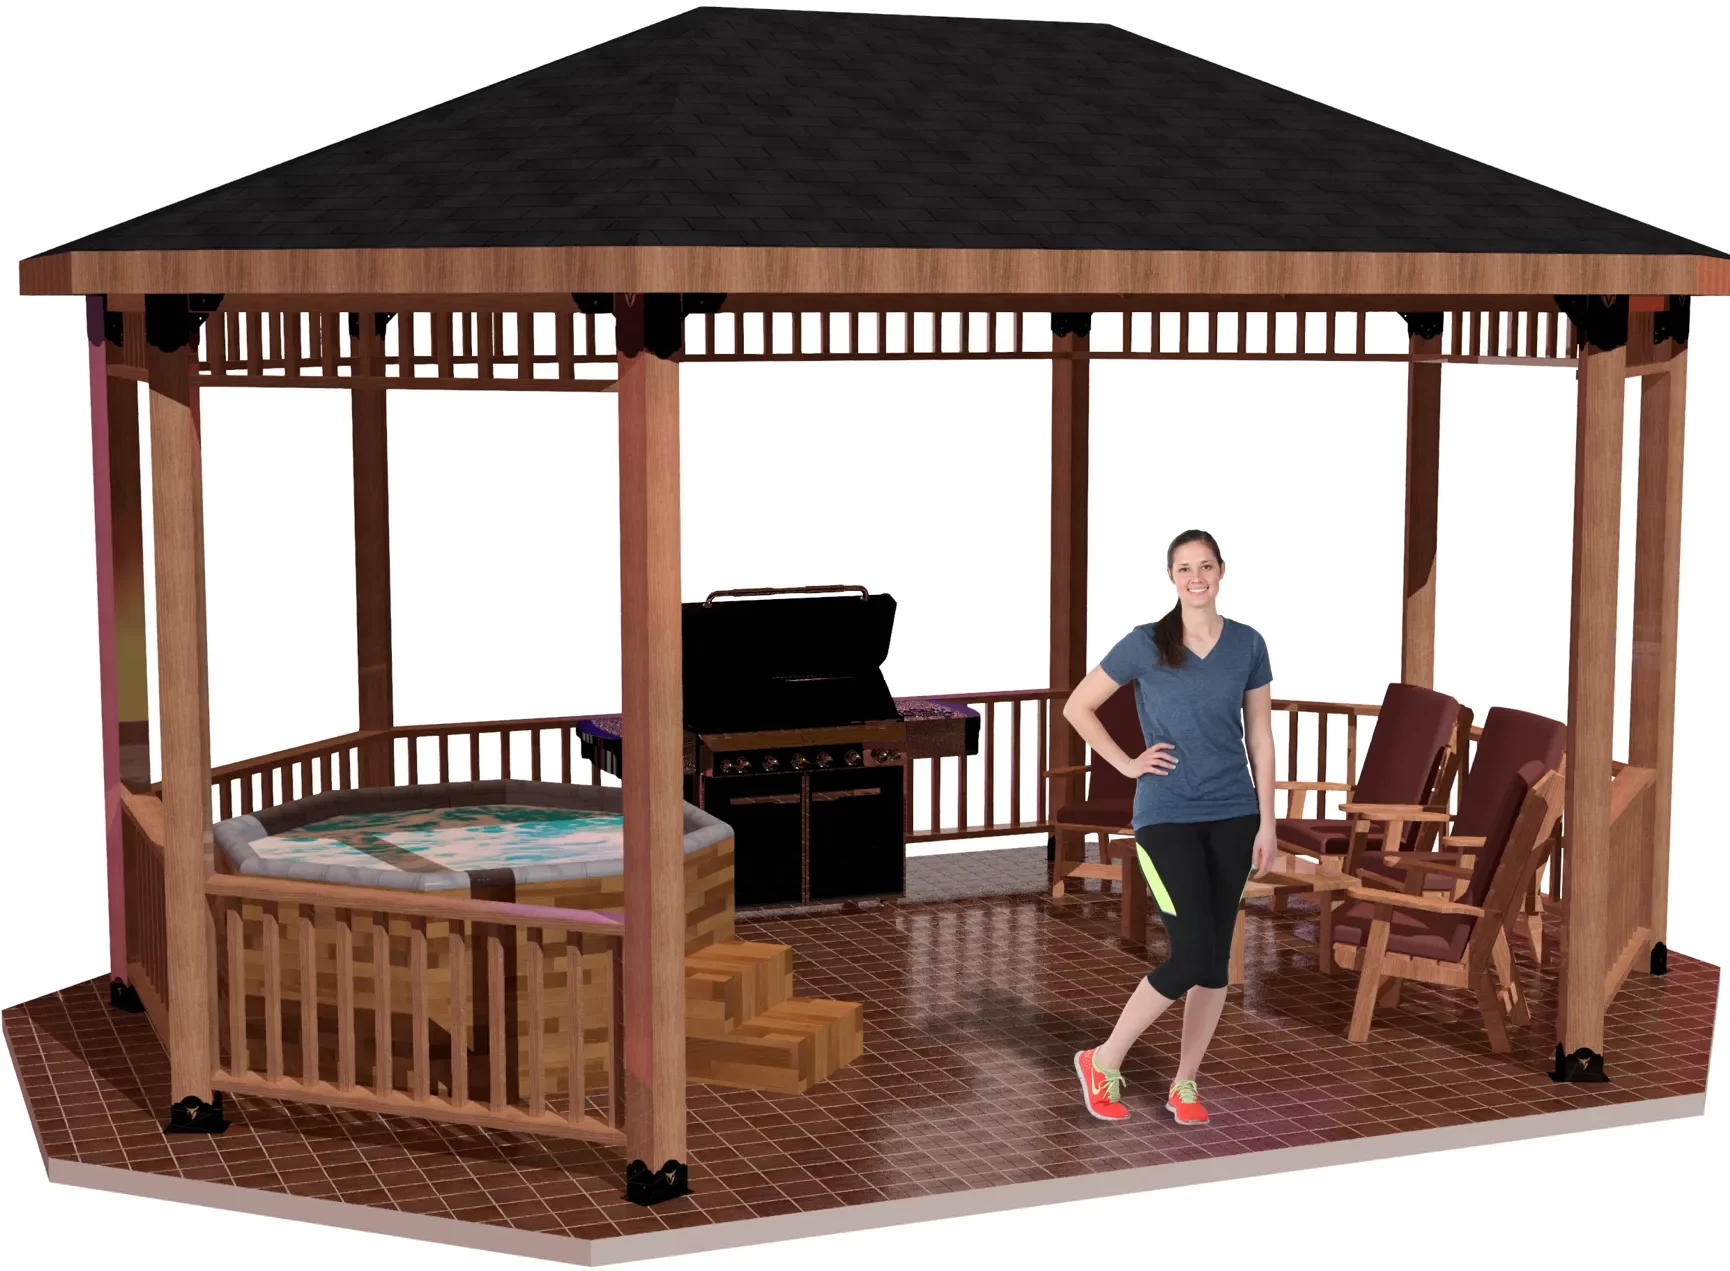 front view of a linear octagon patio cover with solid roof with hottub, grill, and casual furniture and a girl standing inside